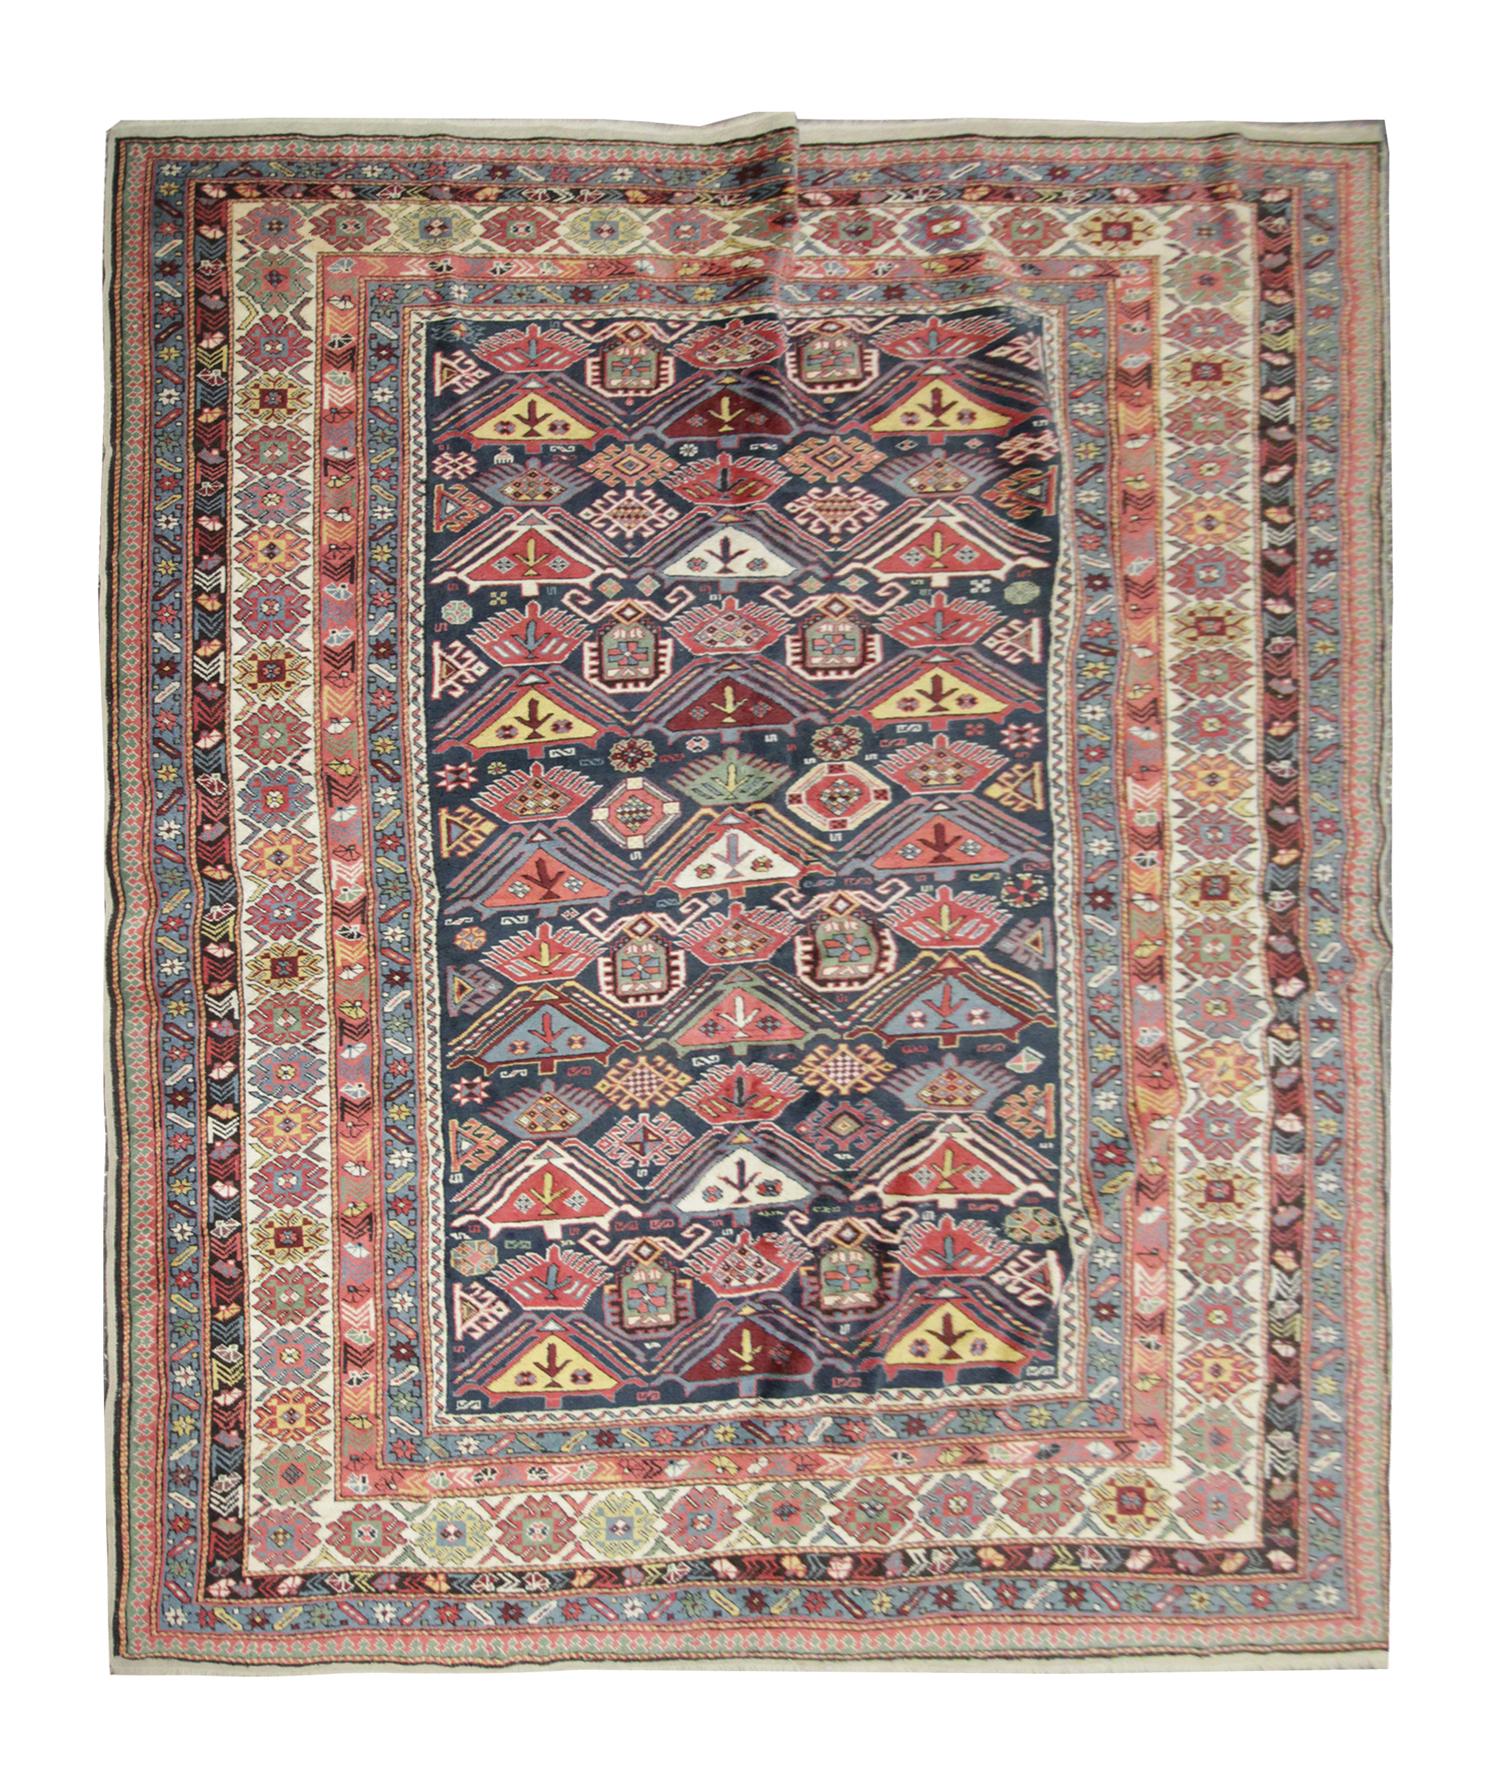 This Oriental rug originates from Shirvan, Azerbaijan; it has been woven by hand with handspun wool and dyed with 100% organic vegetable dyes. With a multi-layered border and a symmetrical pattern, this rug will stand out against any hardwood floor.